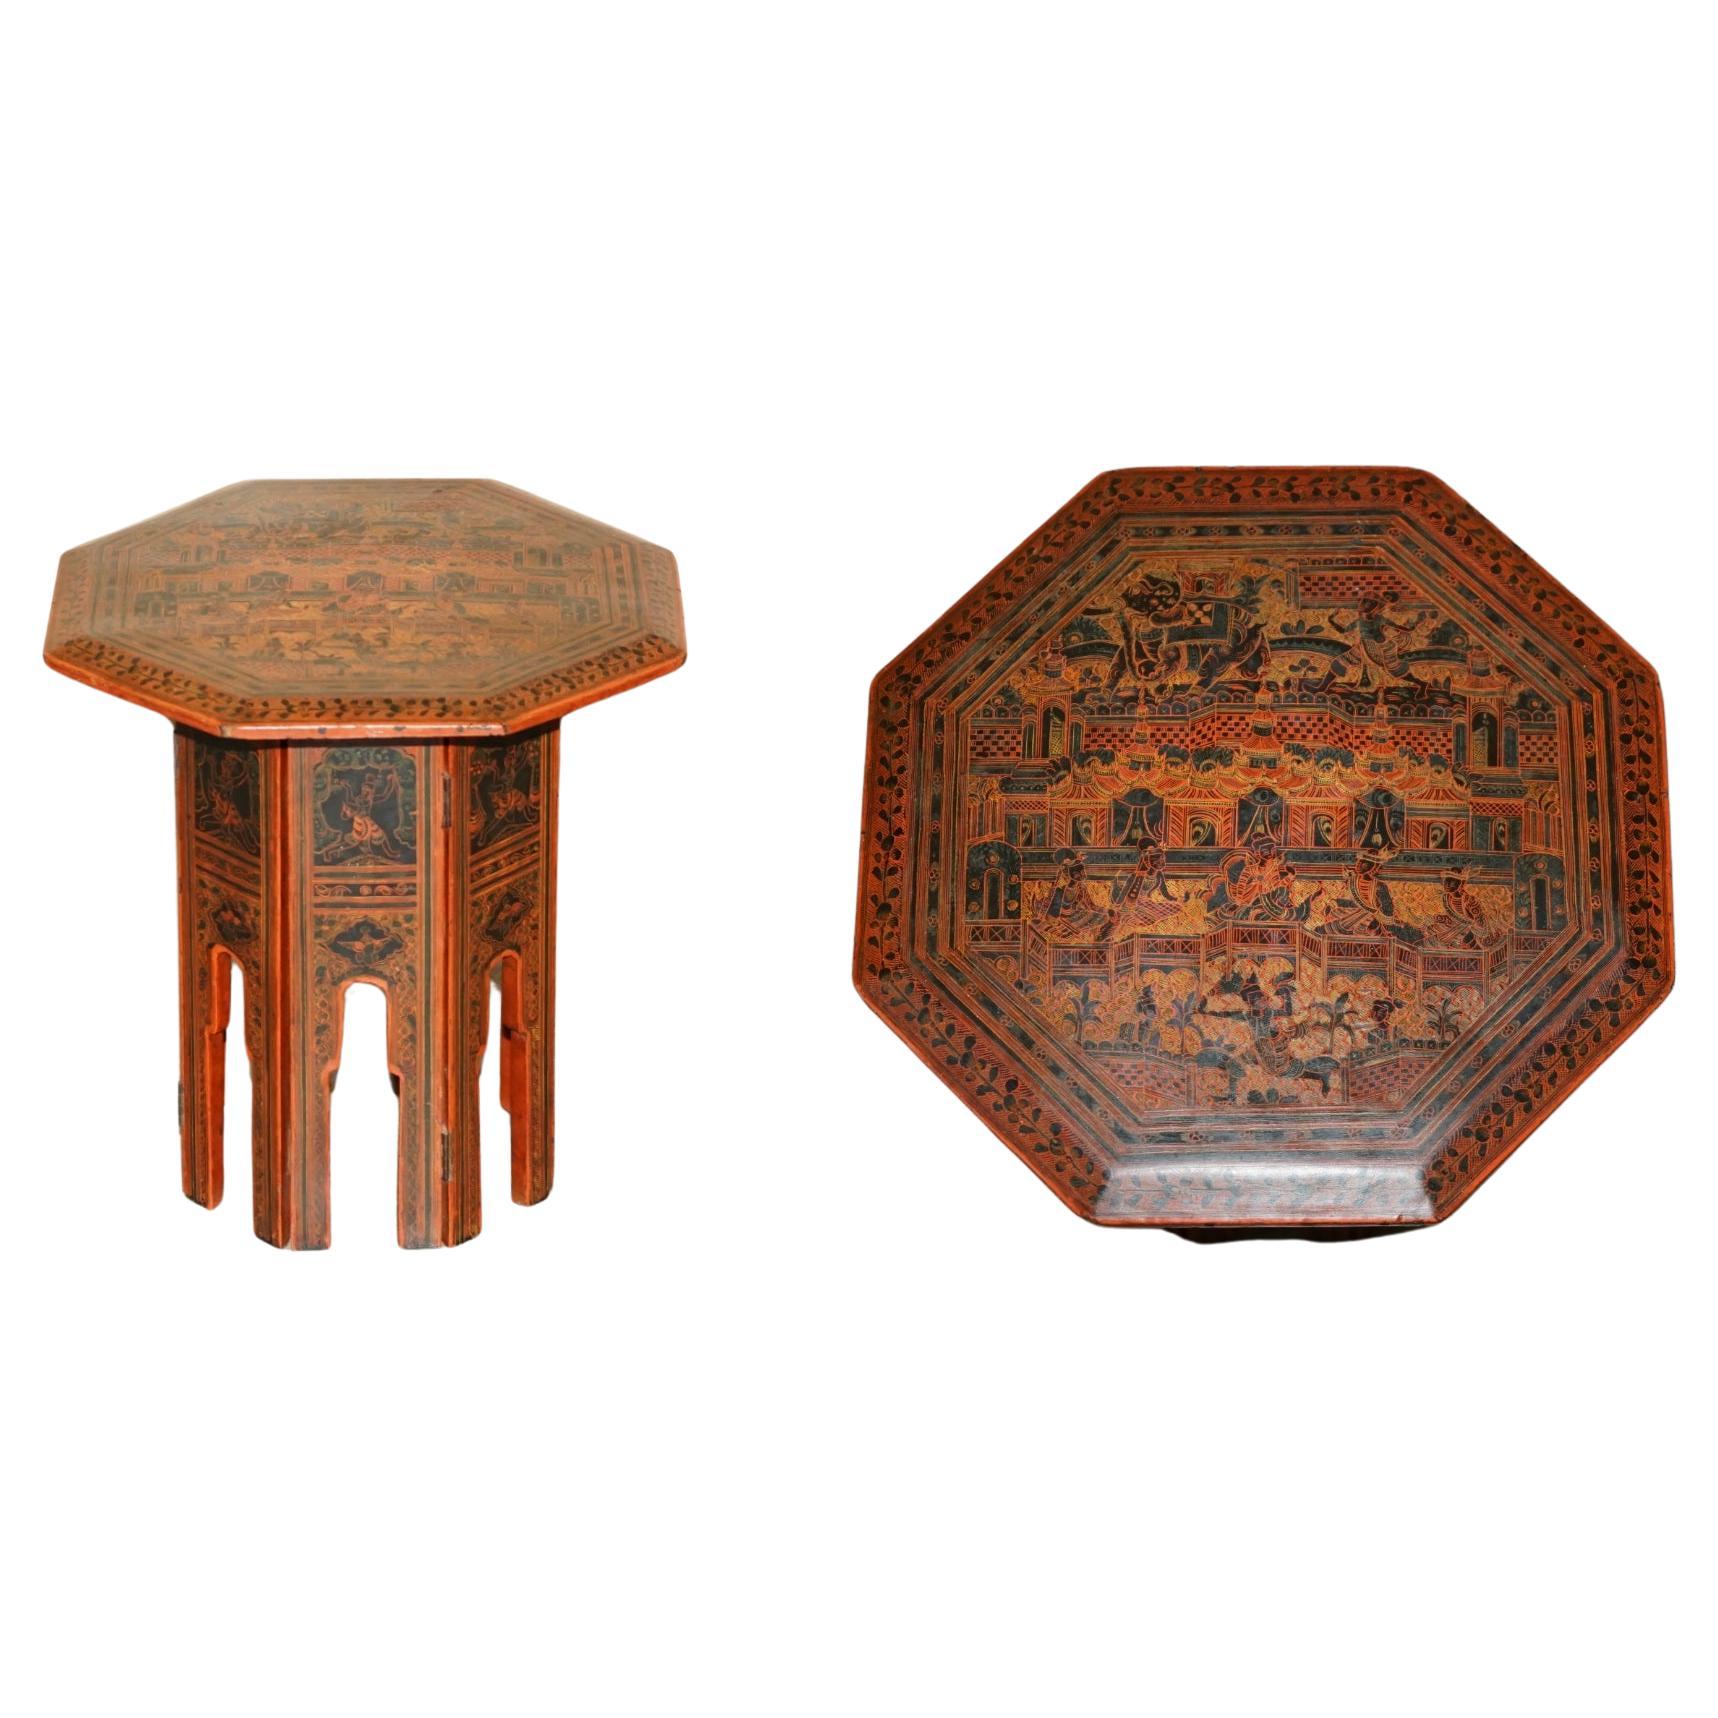 EXQUISITE ANTIQUE CiRCA 1900-1920 BURMESE HAND LACQUERED & PAINTED SIDE TABLE For Sale